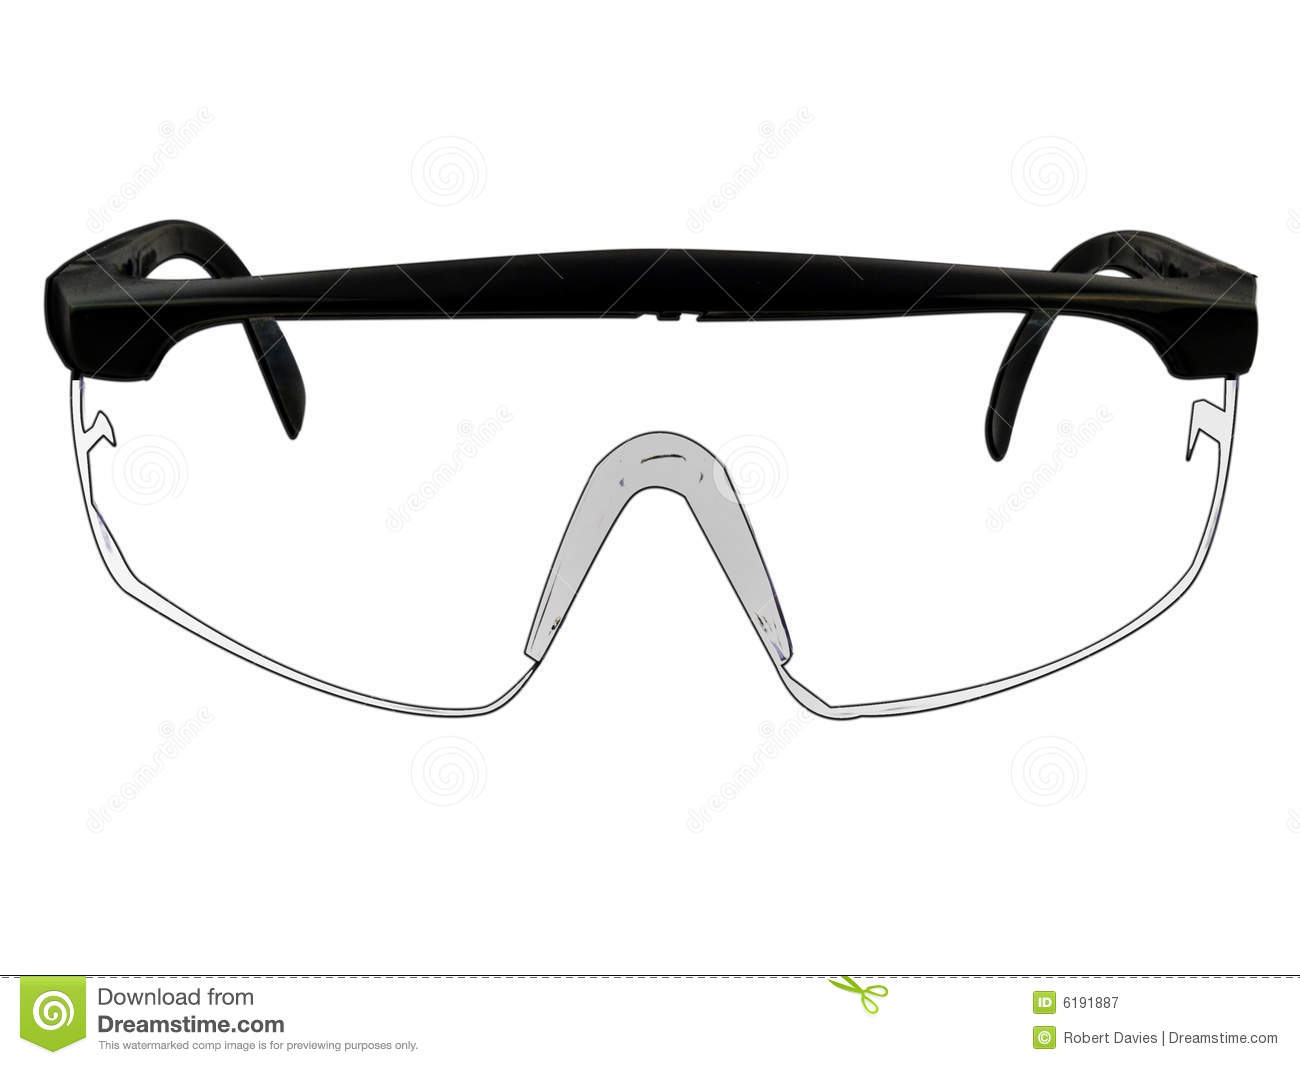 Safety Goggles Glasses Illustration On White Royalty Free Stock